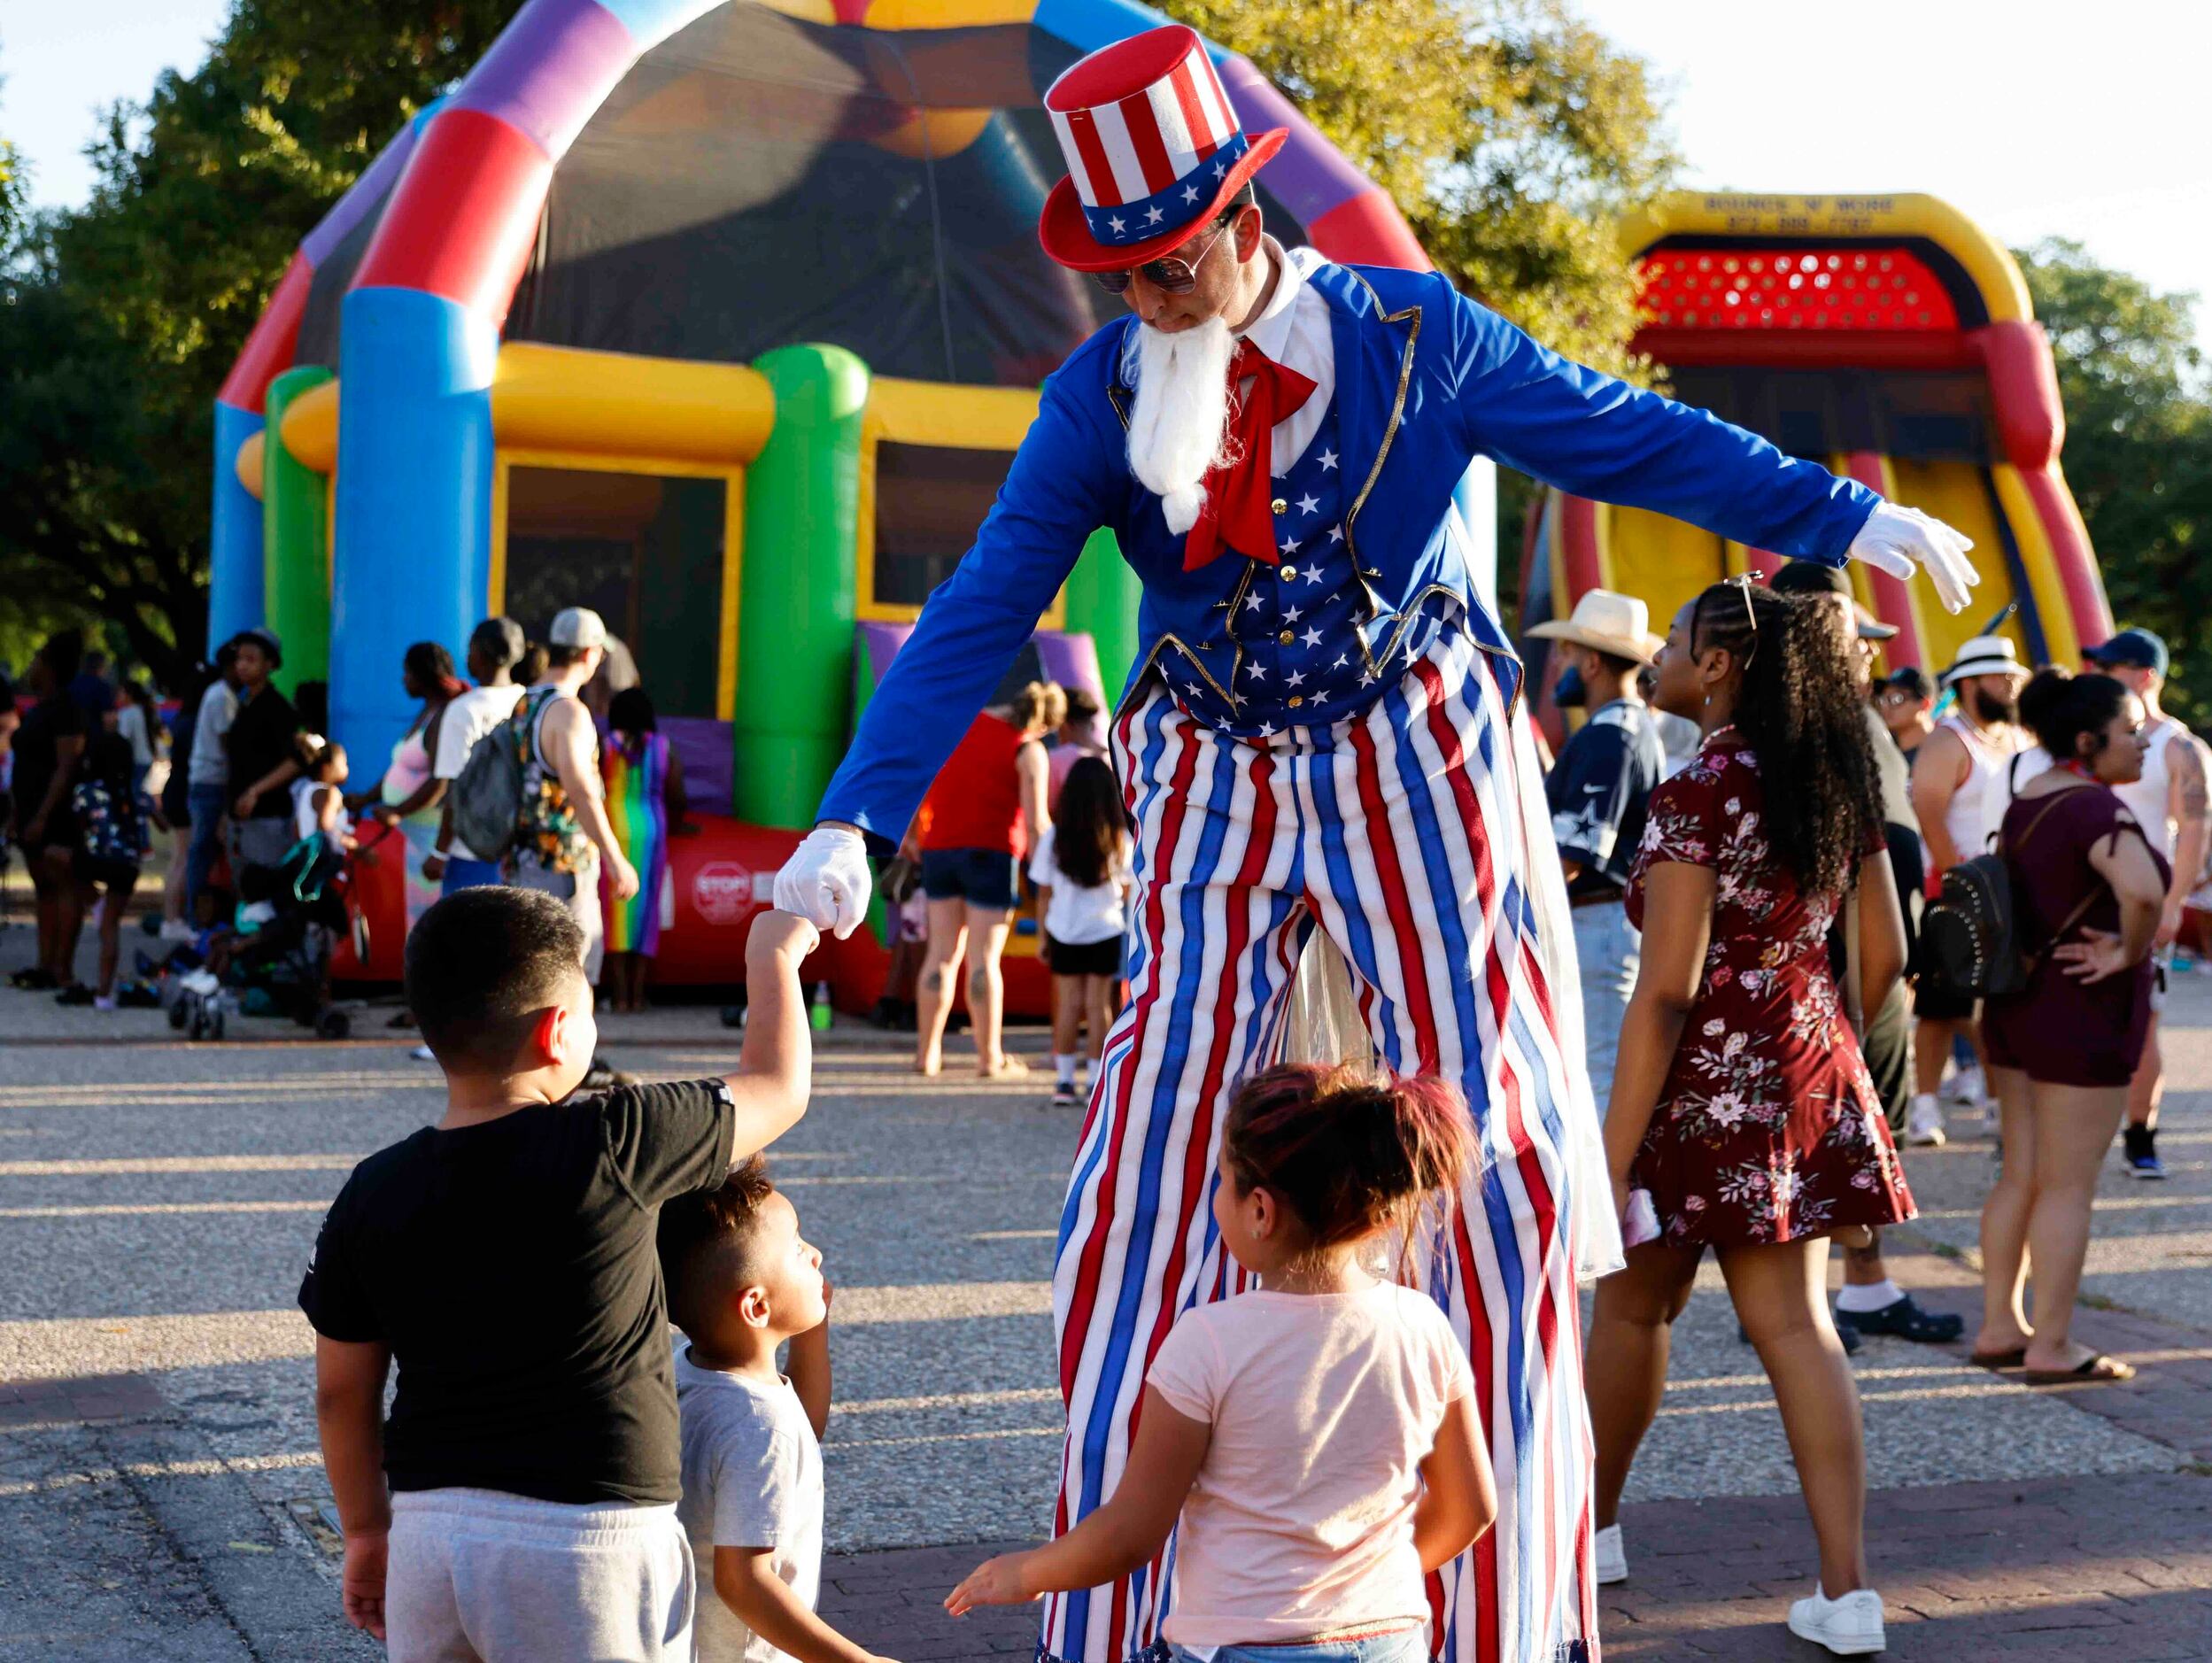 Anthony dressed as “Uncle Sam” fist bumps kids during an Independence Day celebration on...